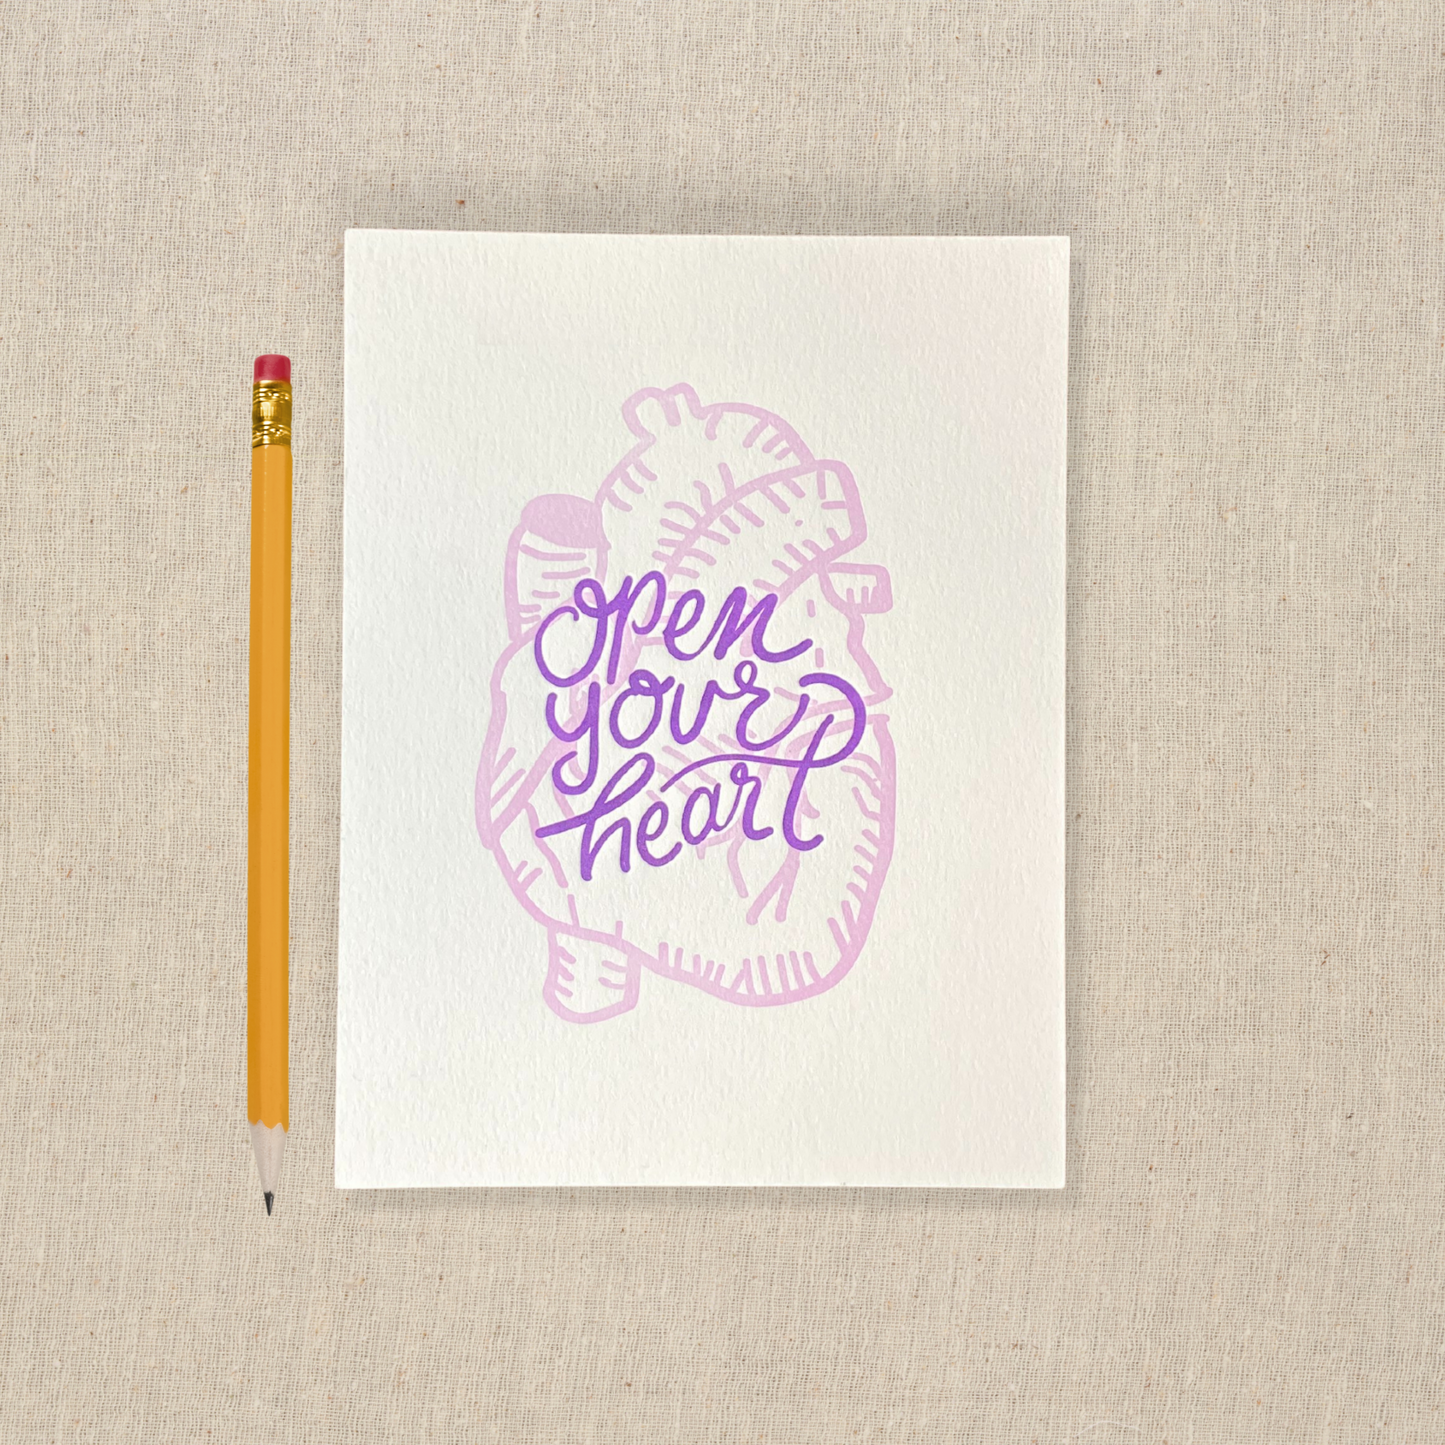 5 x 7 letterpress print with lilac anatomical heart drawing and purple lettering that says open your heart 